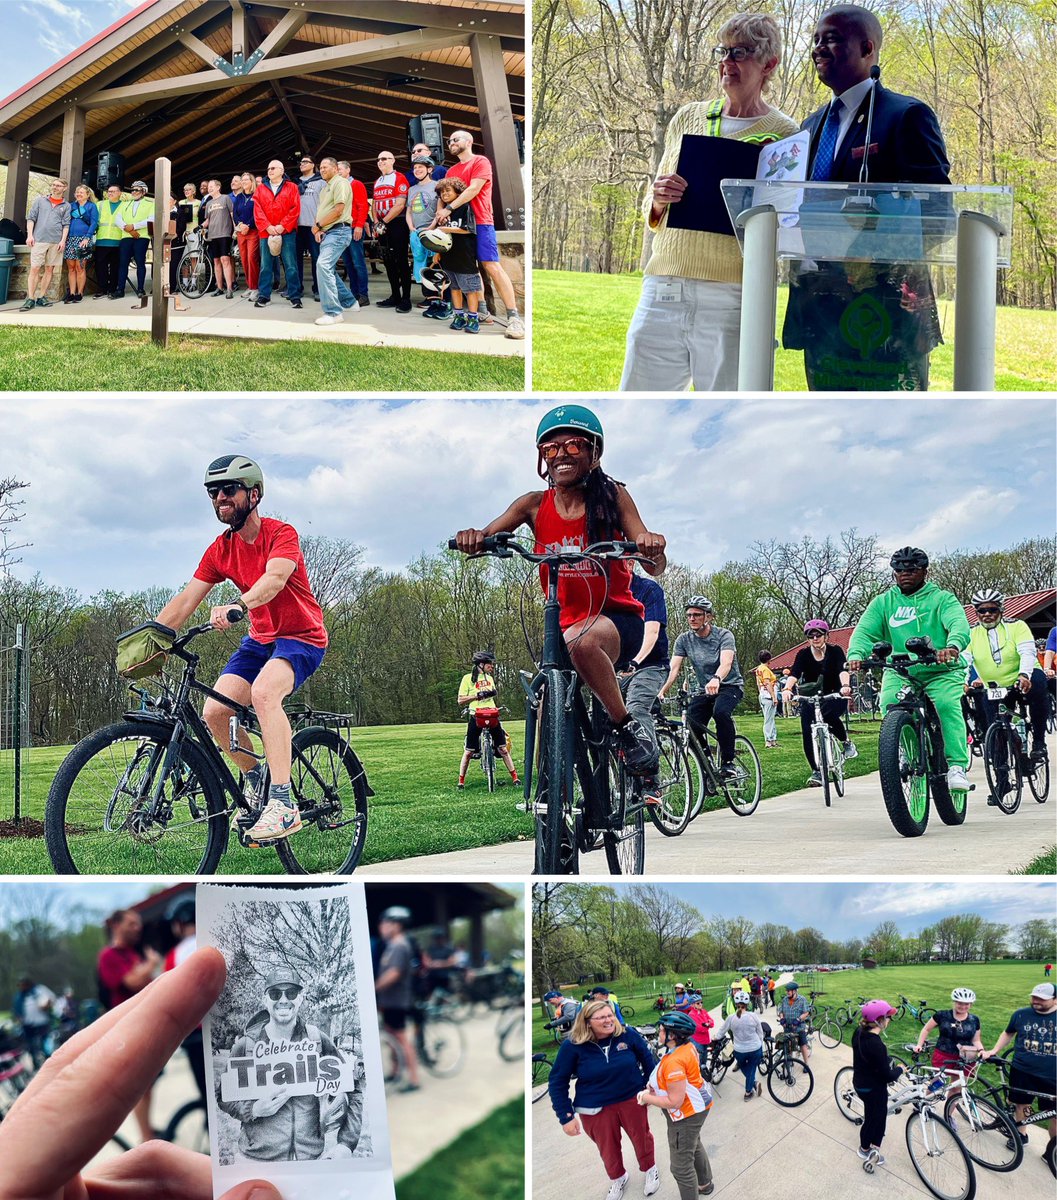 Celebrate Trails Day! Started at Garfield Park Reservation and through Union Miles and Slavic Village. Previewed the Morgana Run Extension Trail which is wrapping up feasibility planning with a $19.5M implementation grant request pending.